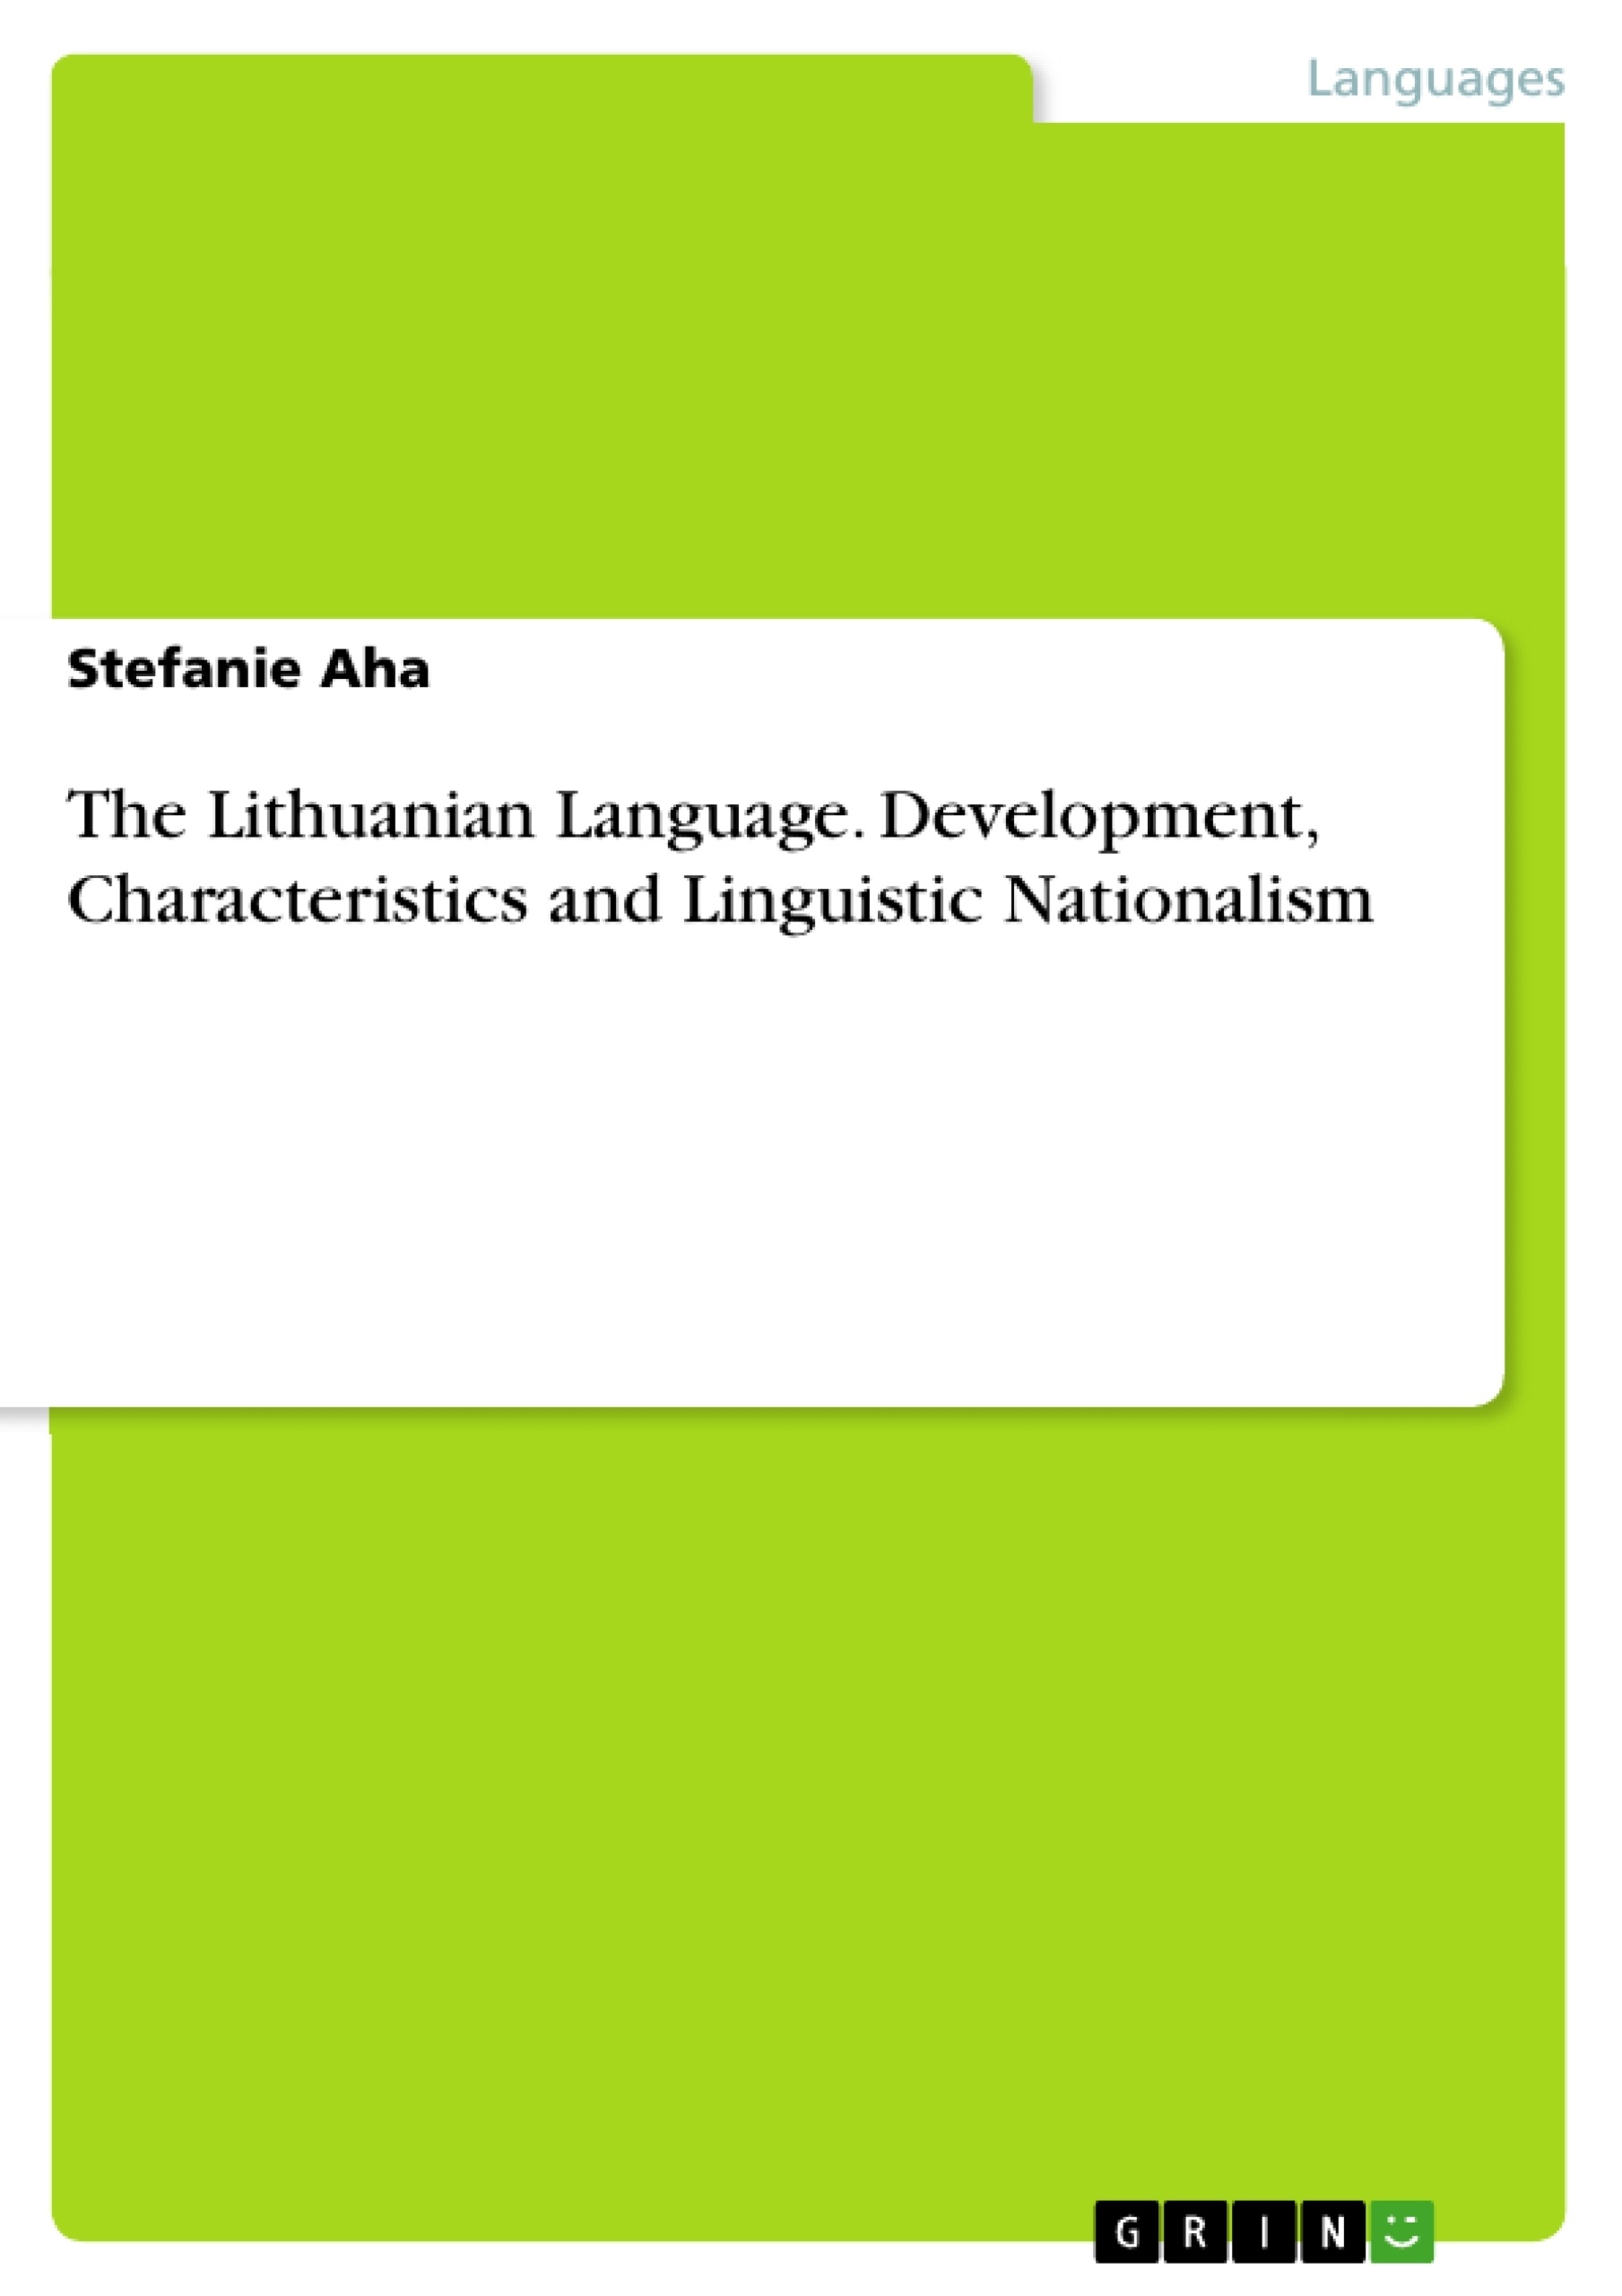 Título: The Lithuanian Language. Development, Characteristics and Linguistic Nationalism